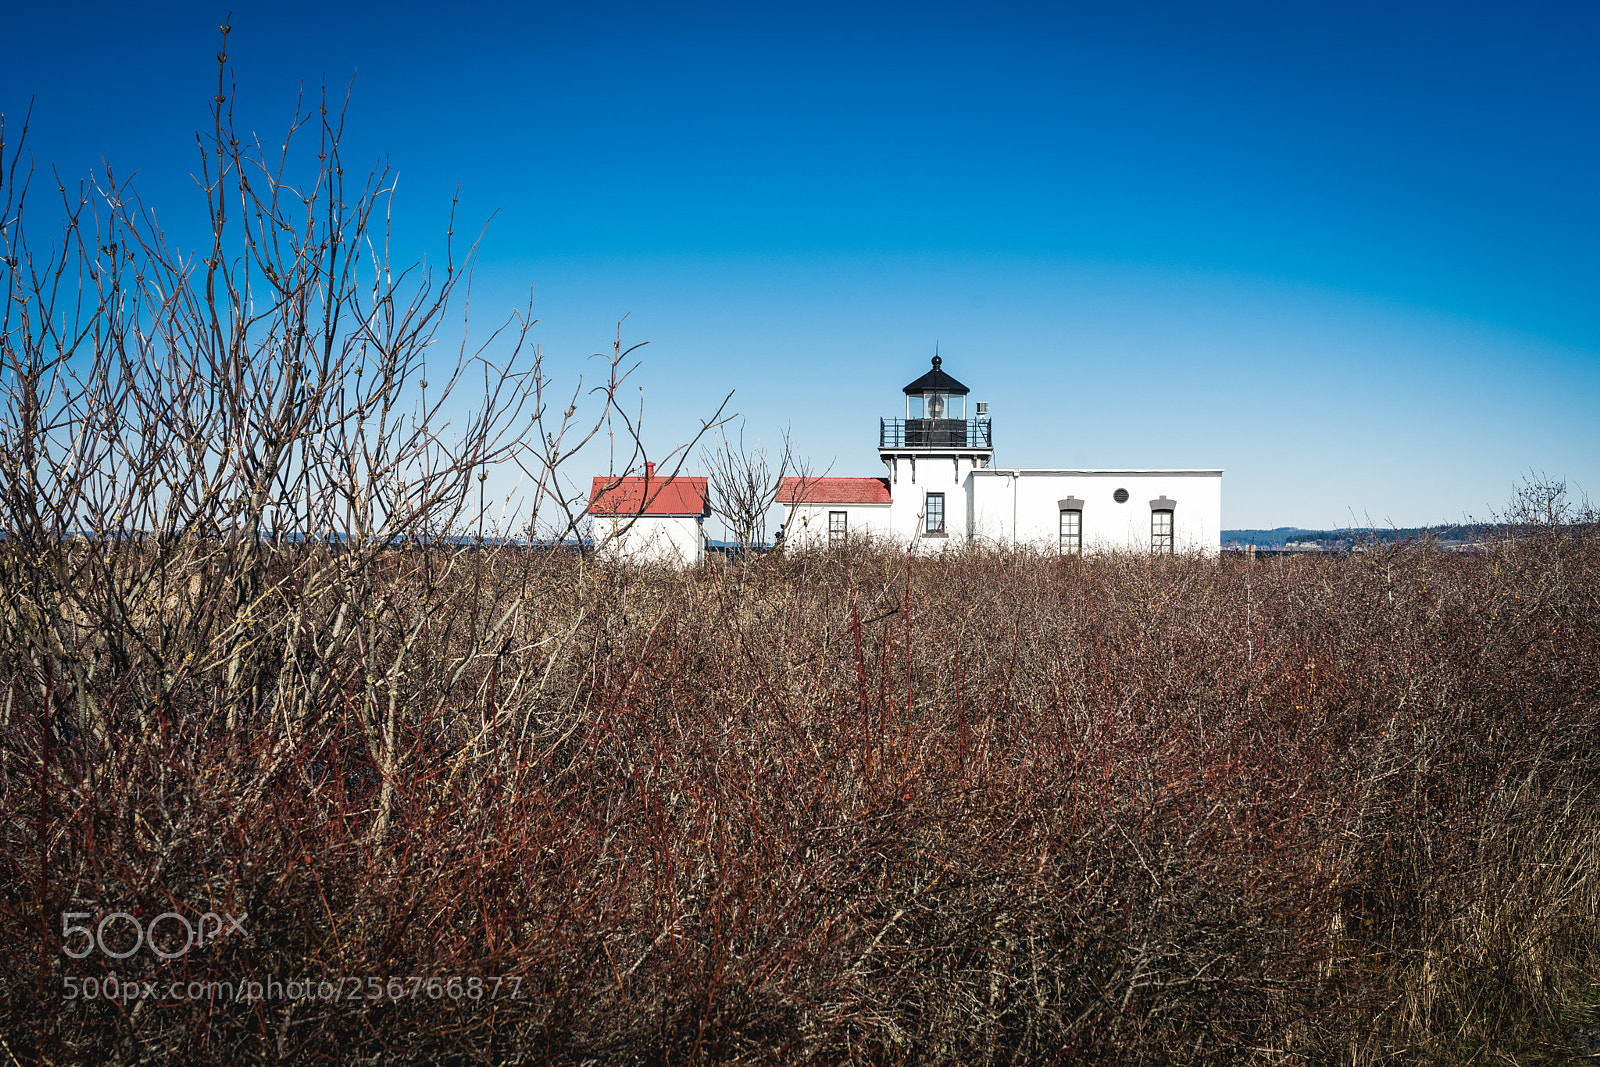 Sony a7 II sample photo. Point no point lighthouse photography